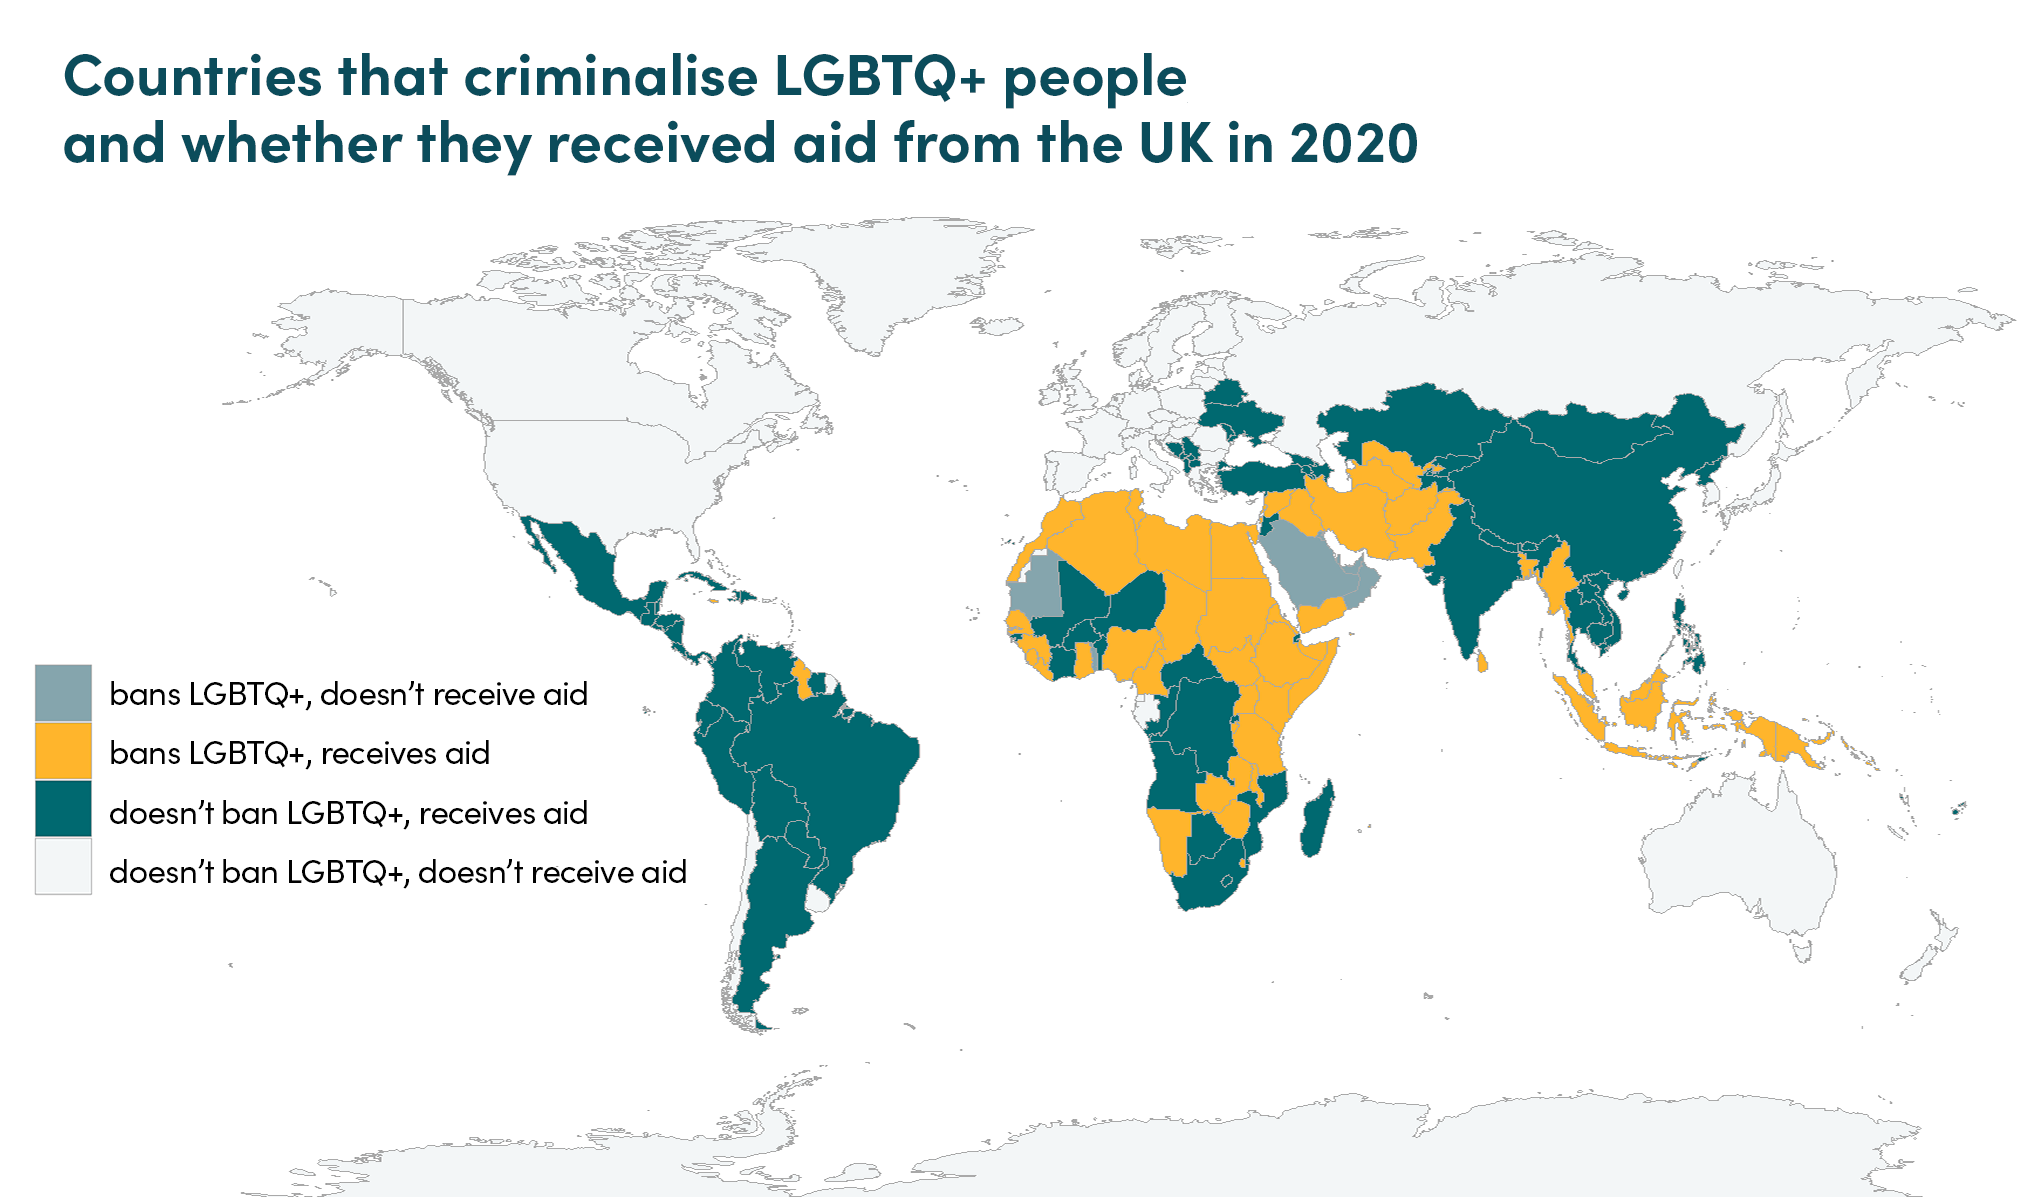 Countries that criminalise LGBTQ+ people, by whether they received aid from UK in 2020